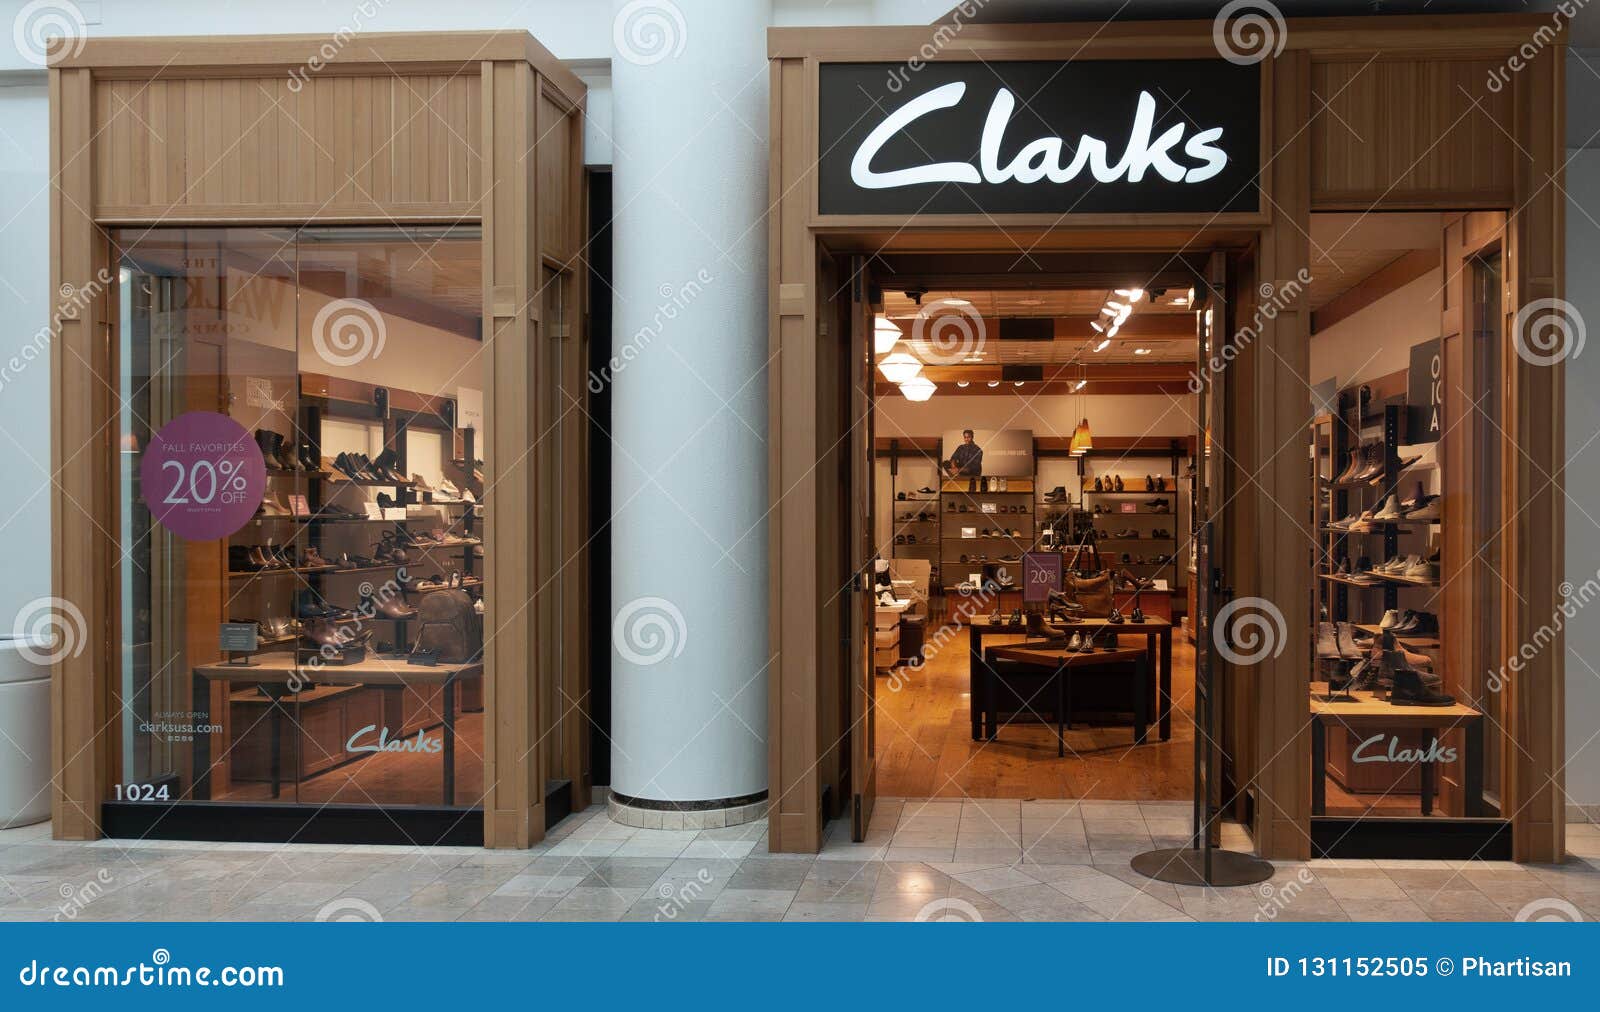 clarks outlet dolphin mall off 66 